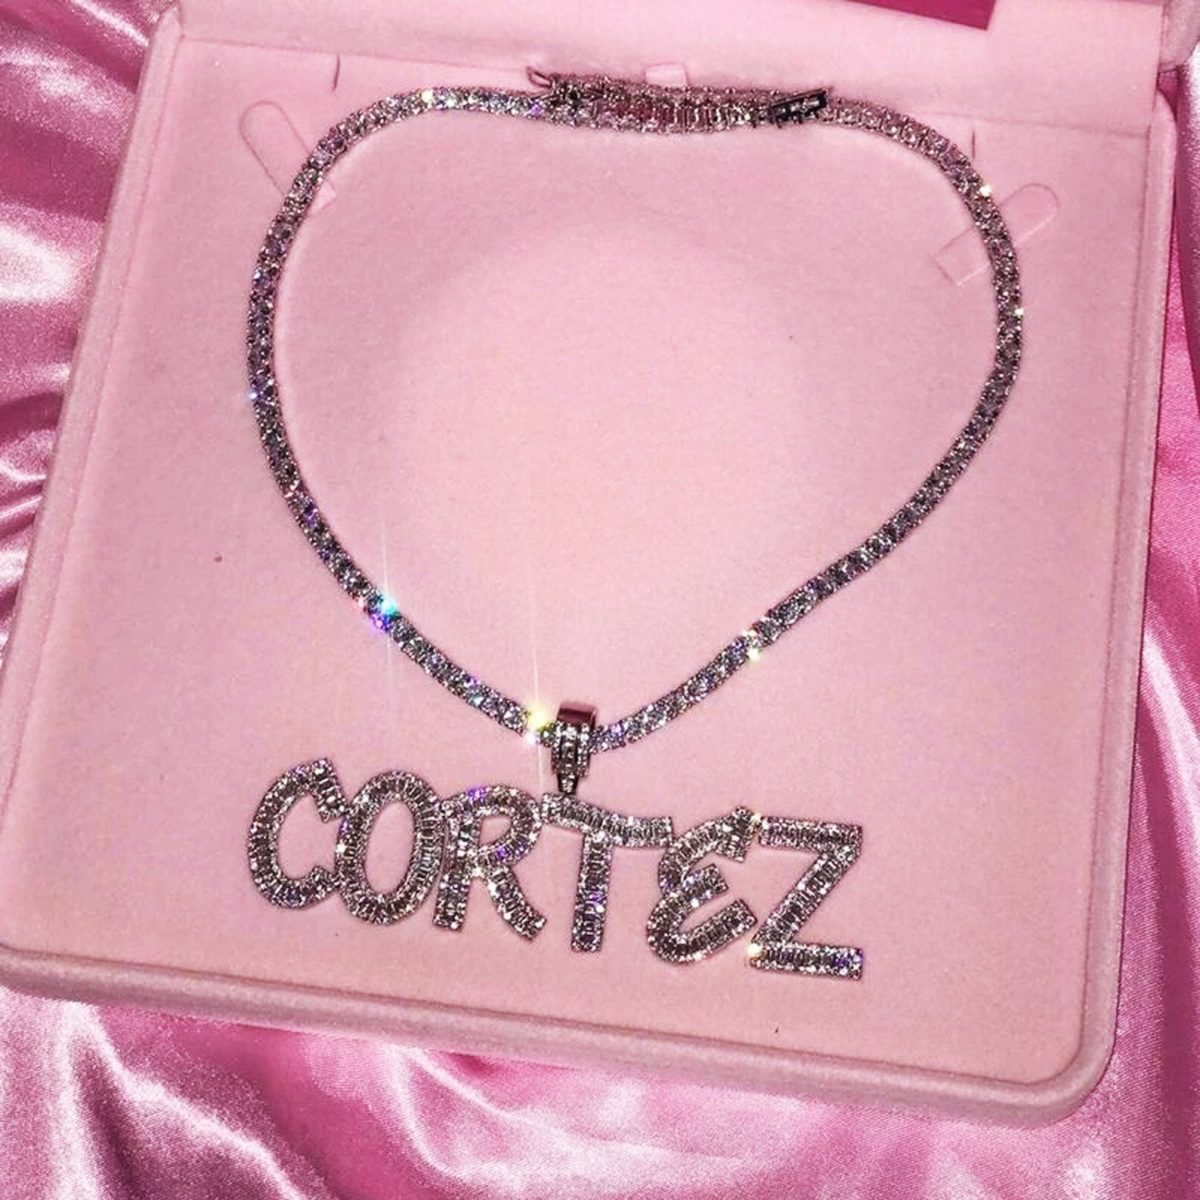 10 customized name necklace gifts